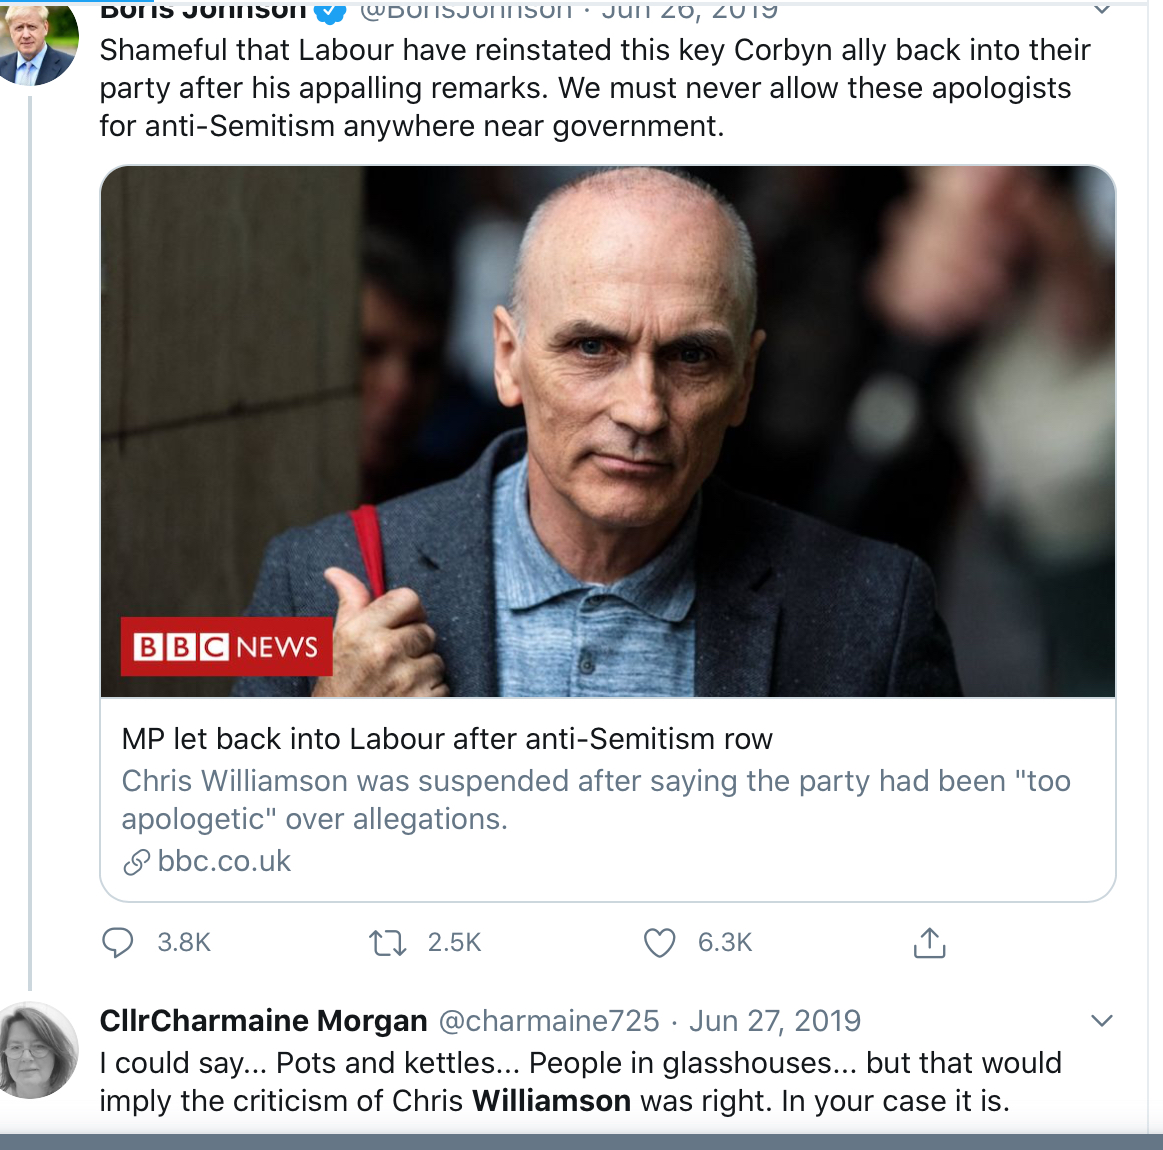 And of course, Cllr Morgan is supportive of Chris Williamson, expelled from Labour for anti-Jewish racism.